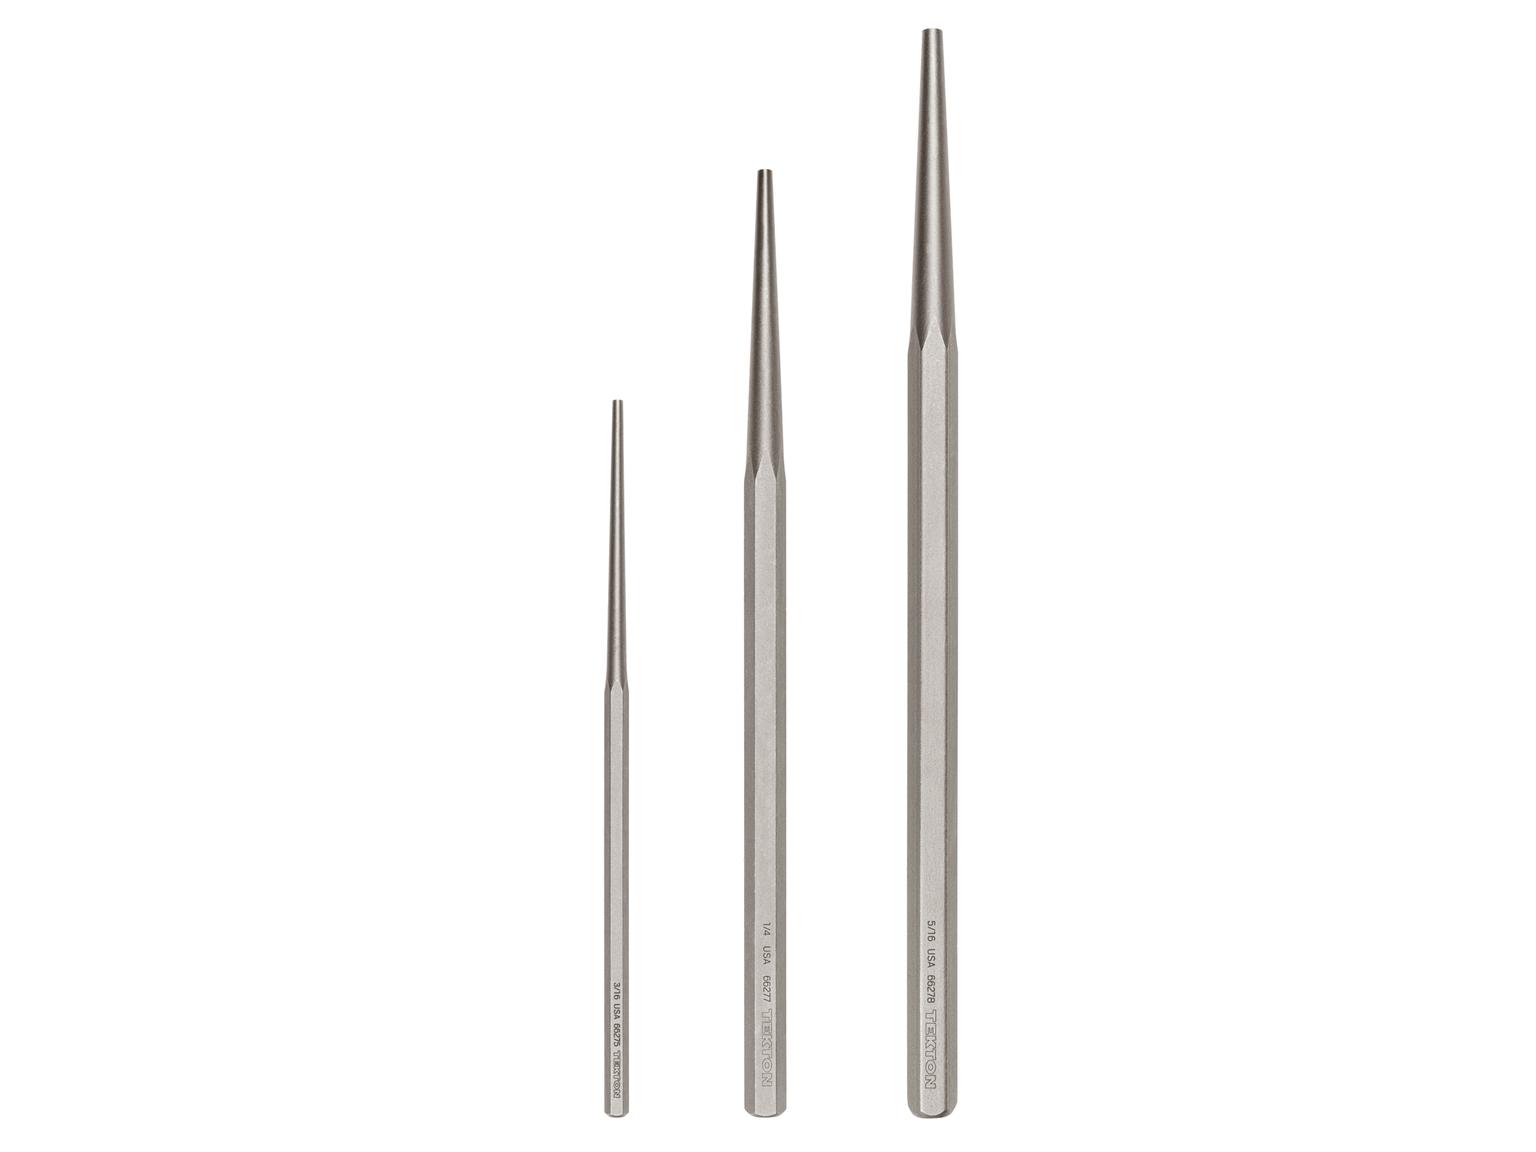 Long Alignment Punch Set, 3-Piece (3/16, 1/4, 5/16 Inch)